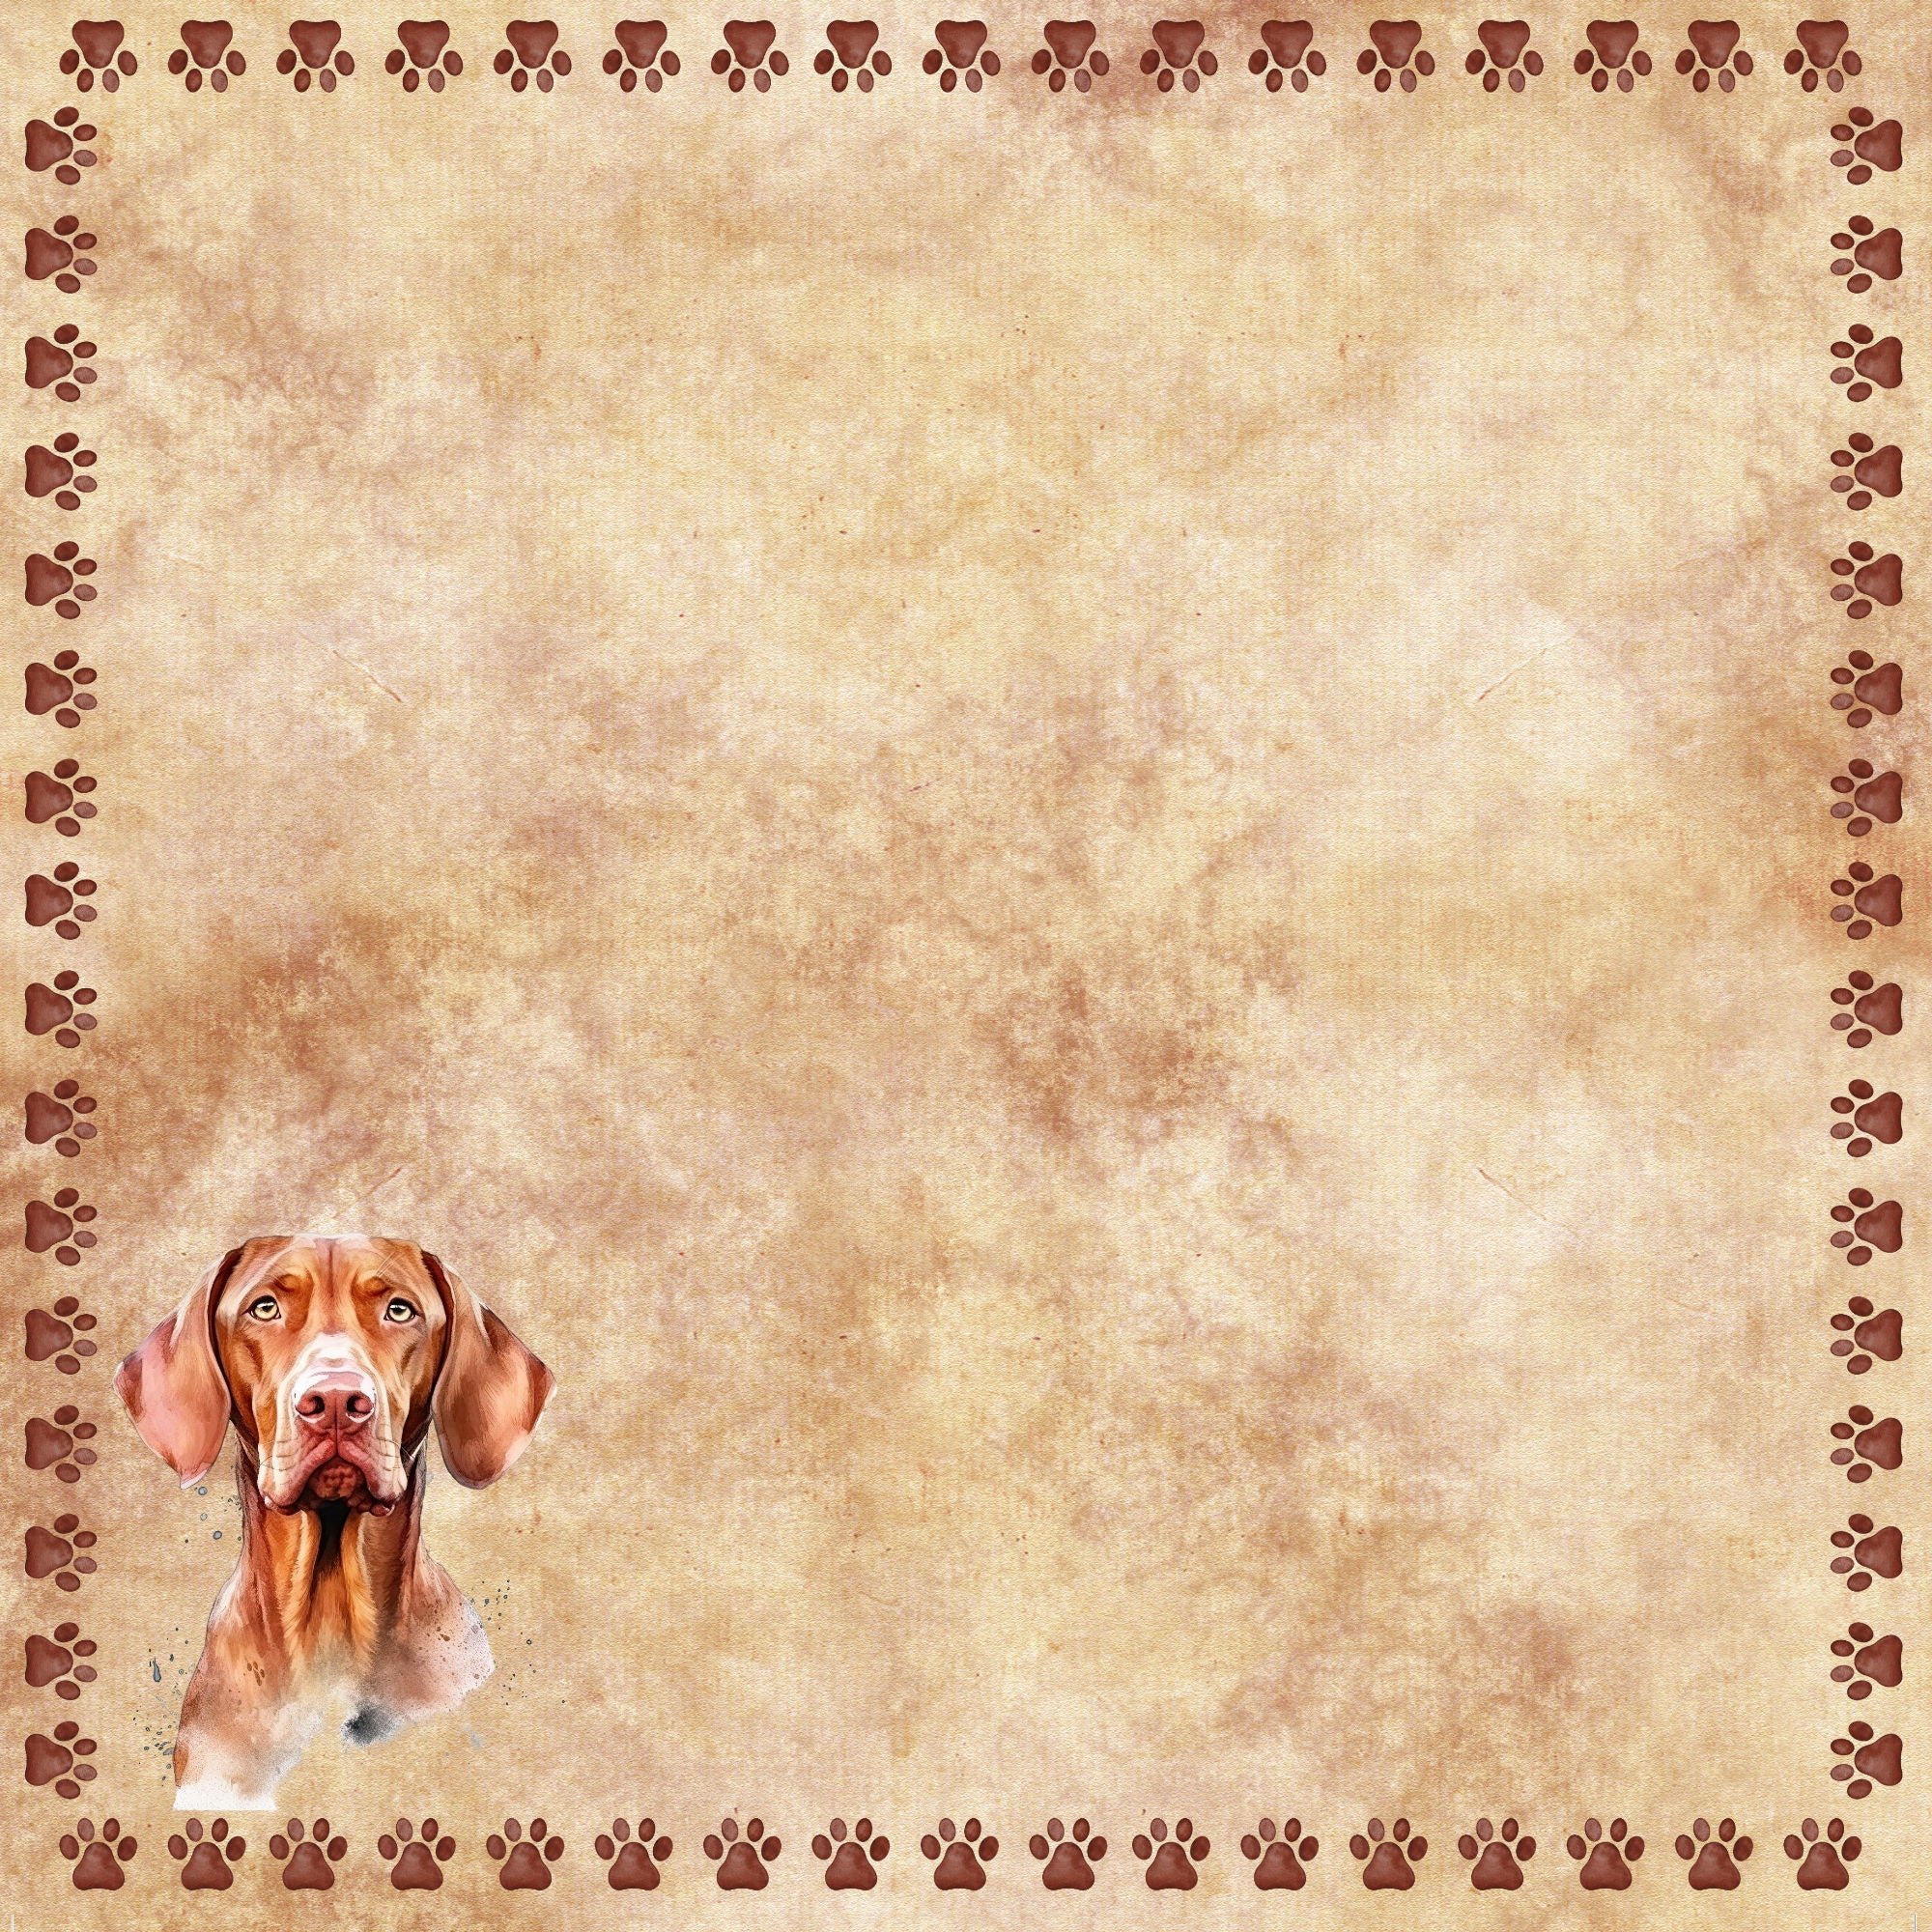 Dog Breeds Collection Vizsla 12 x 12 Double-Sided Scrapbook Paper by SSC Designs